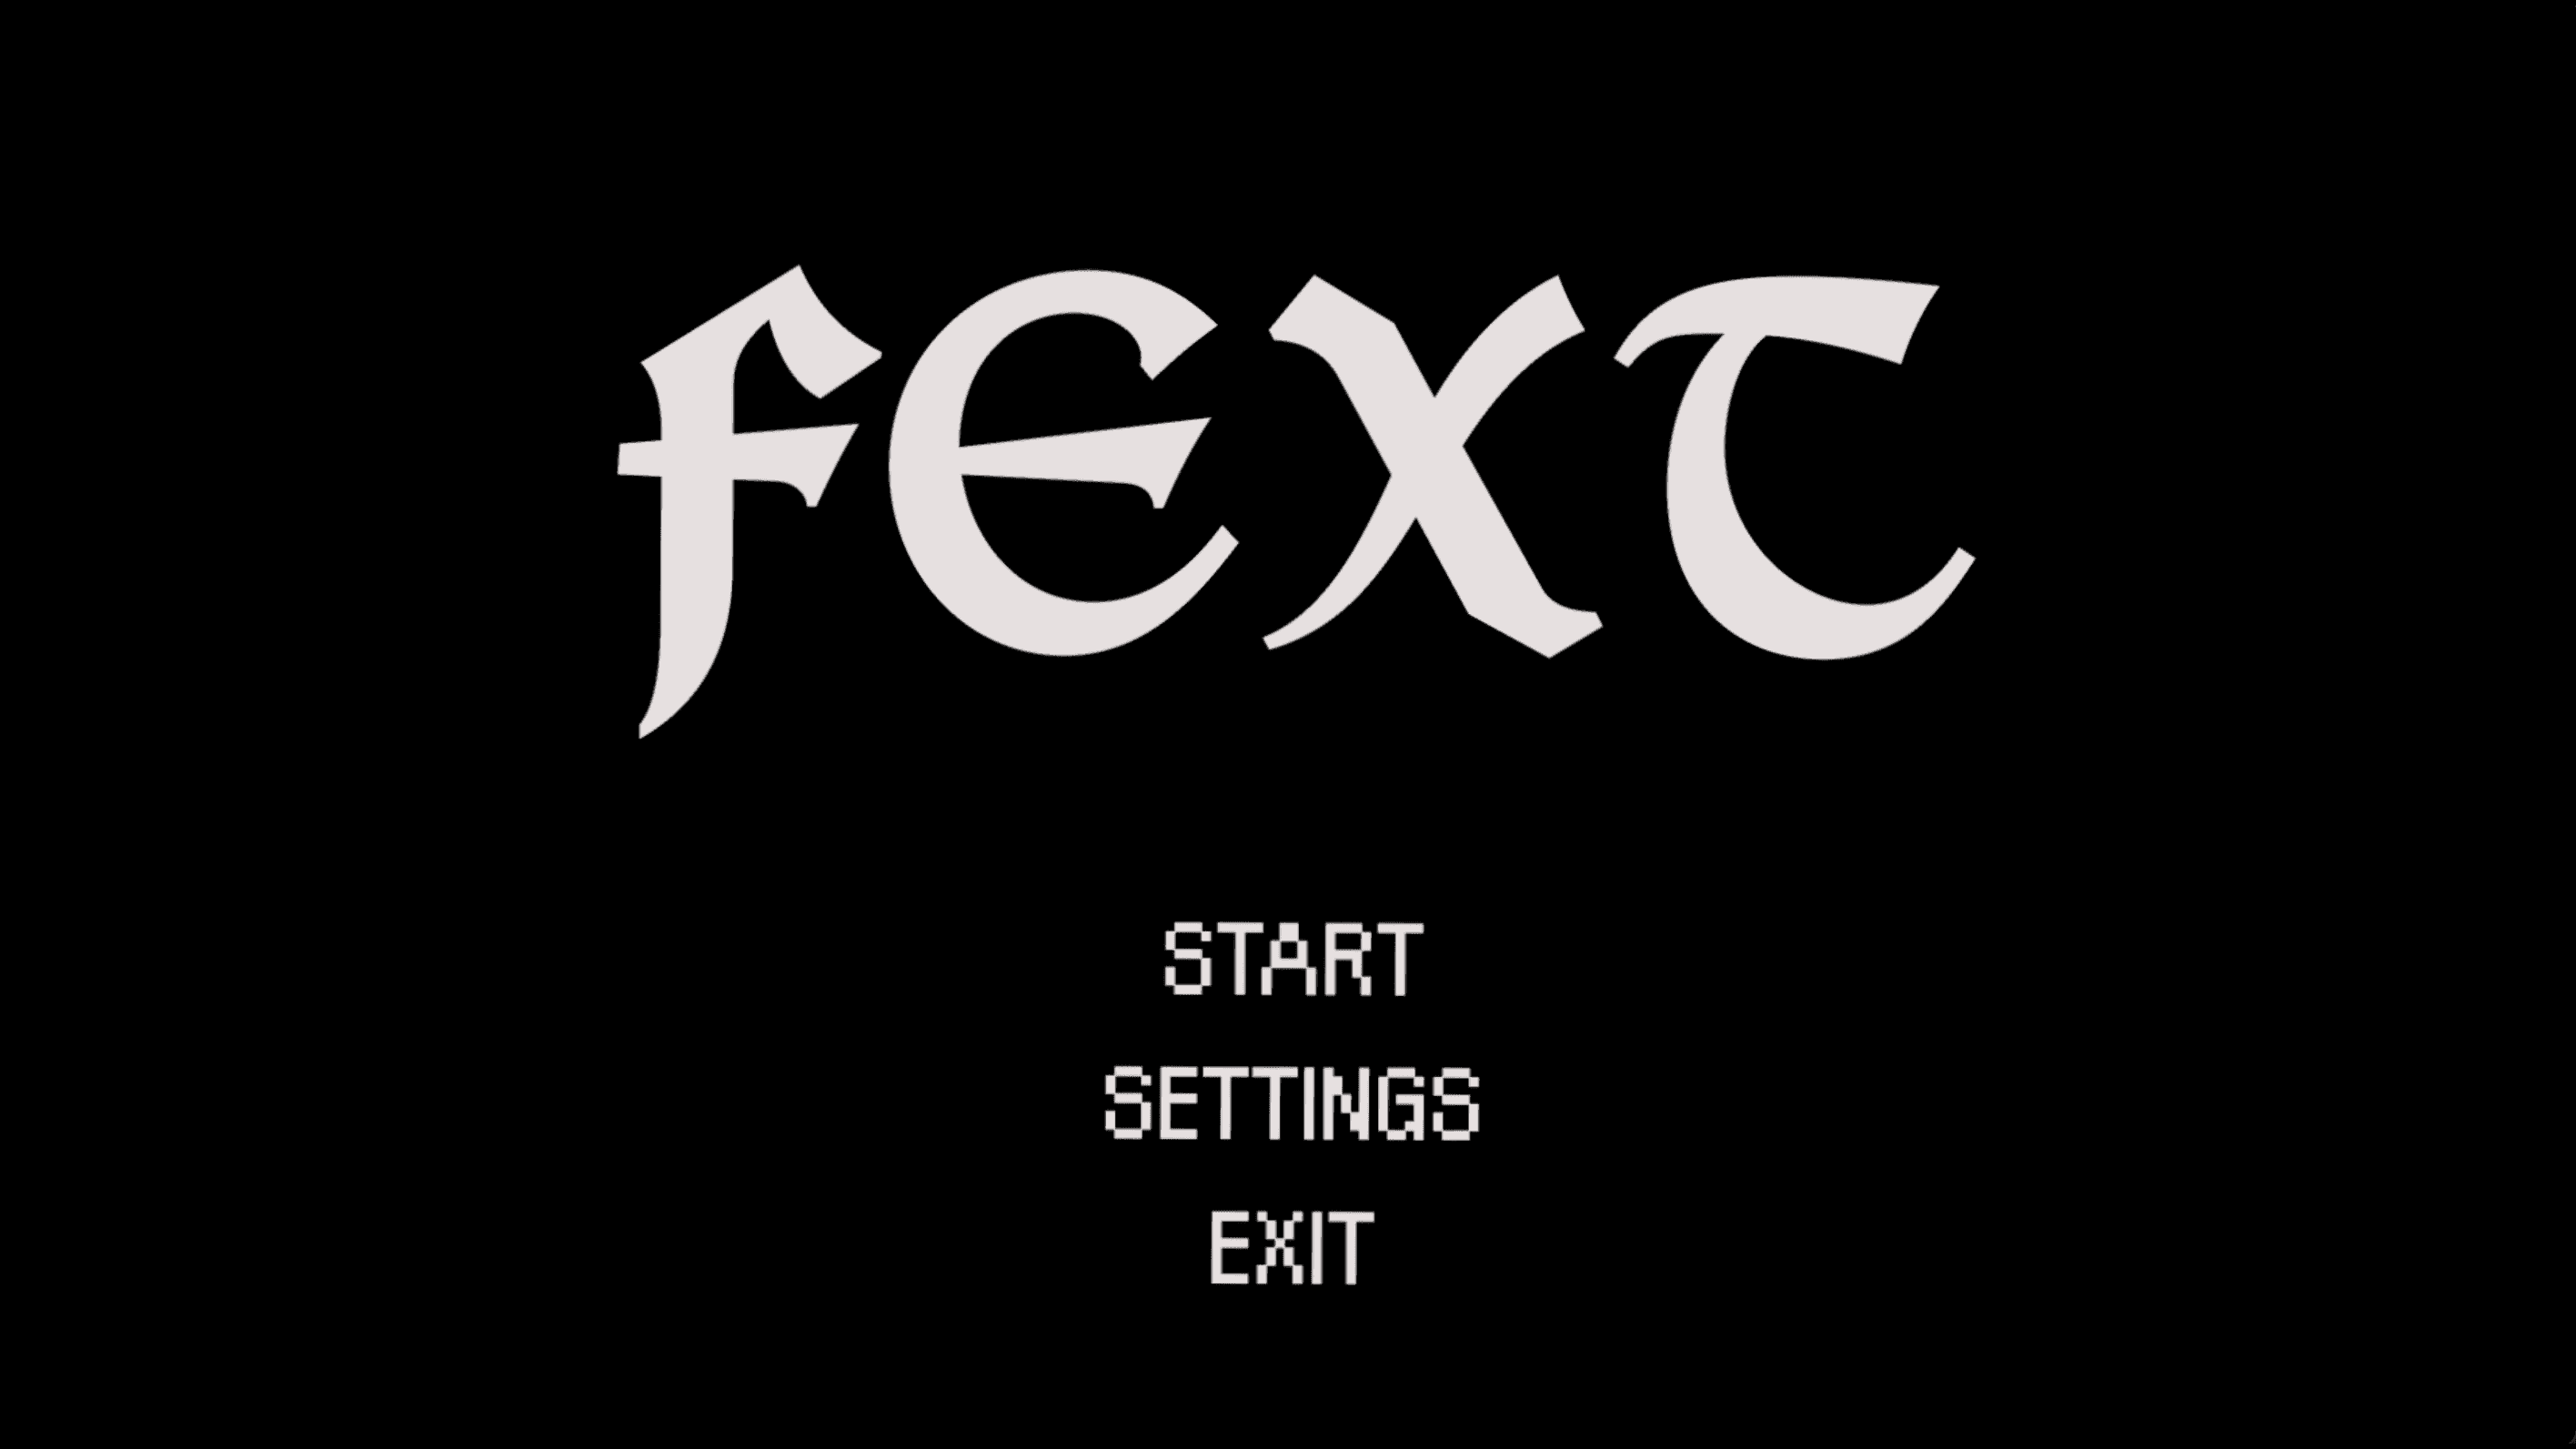 Fext